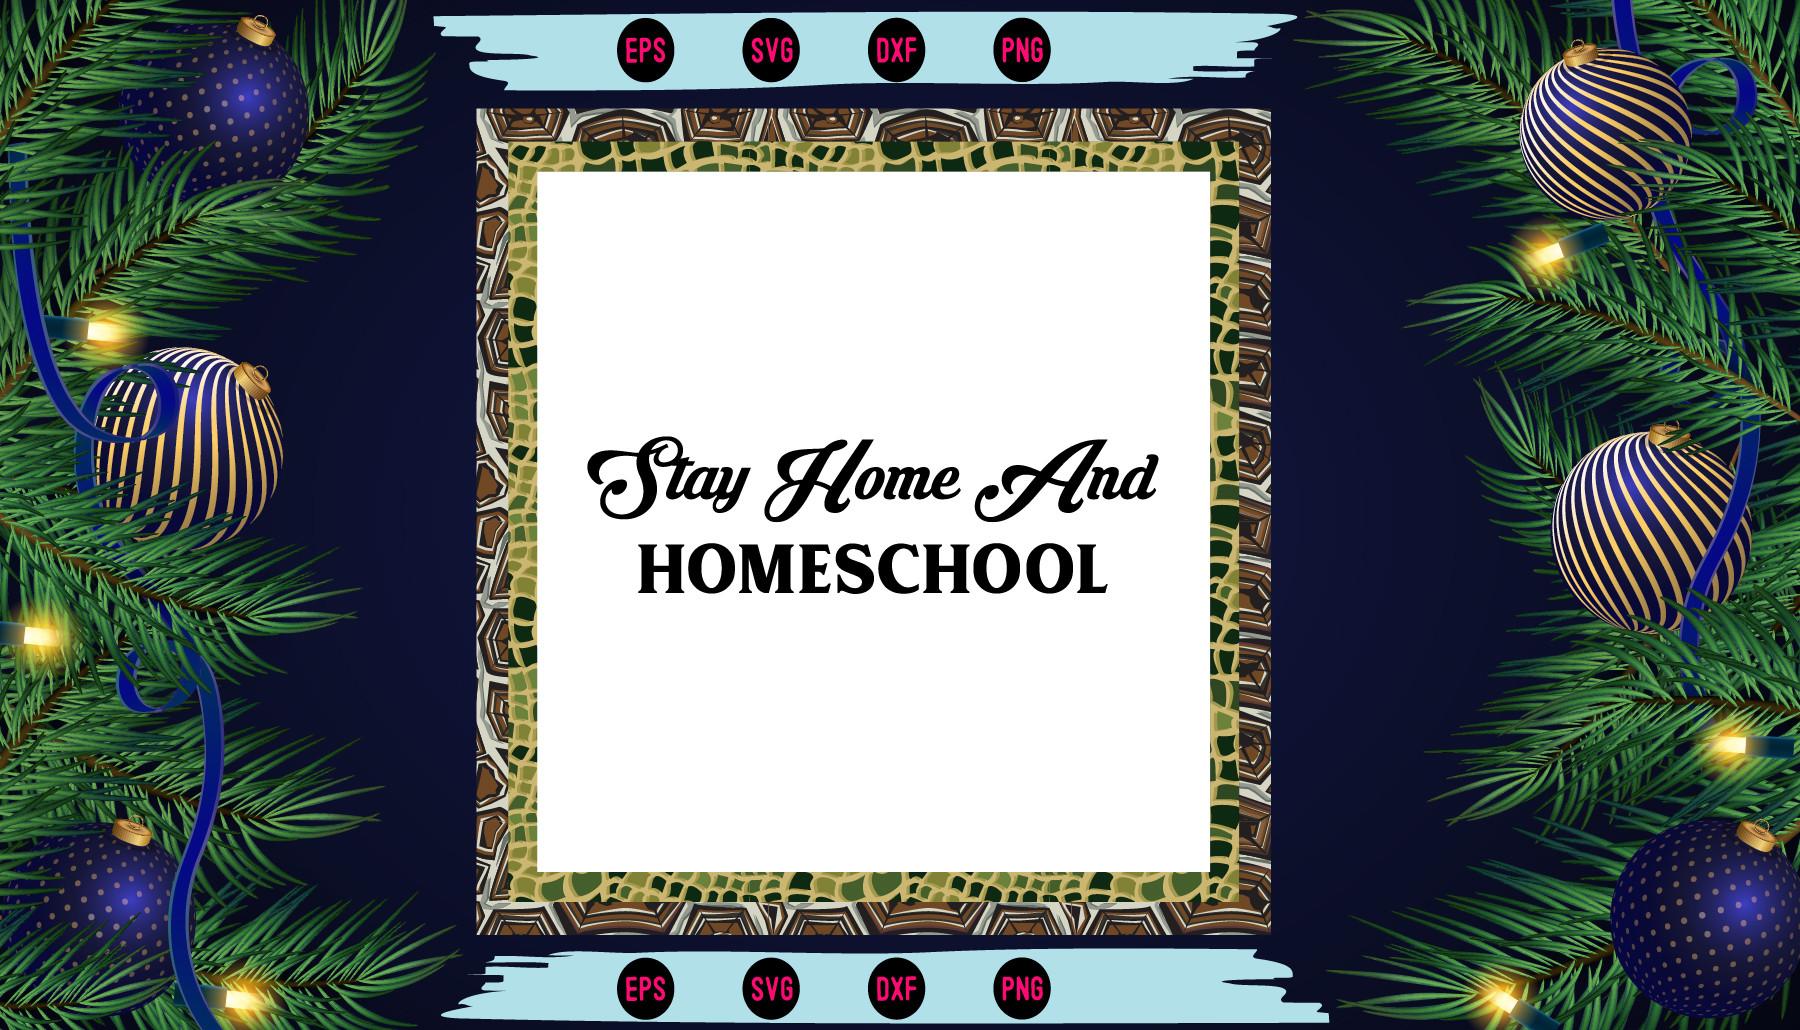 Stay Home and Homeschool